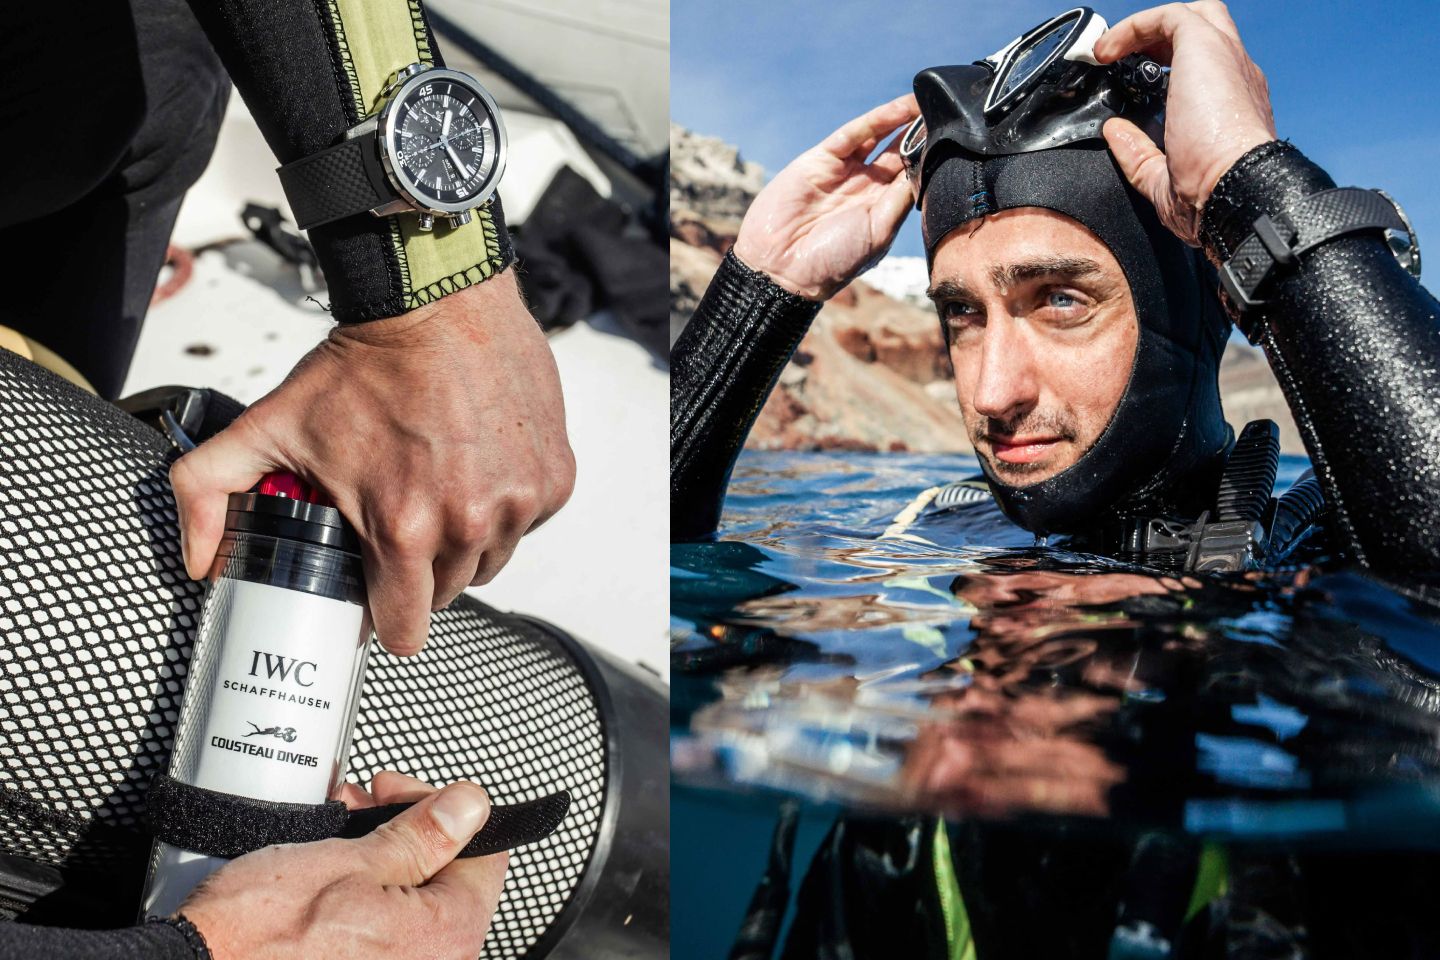 IWC has a partnership with Pierre-Yves Cousteau in its ocean conservation endeavors.